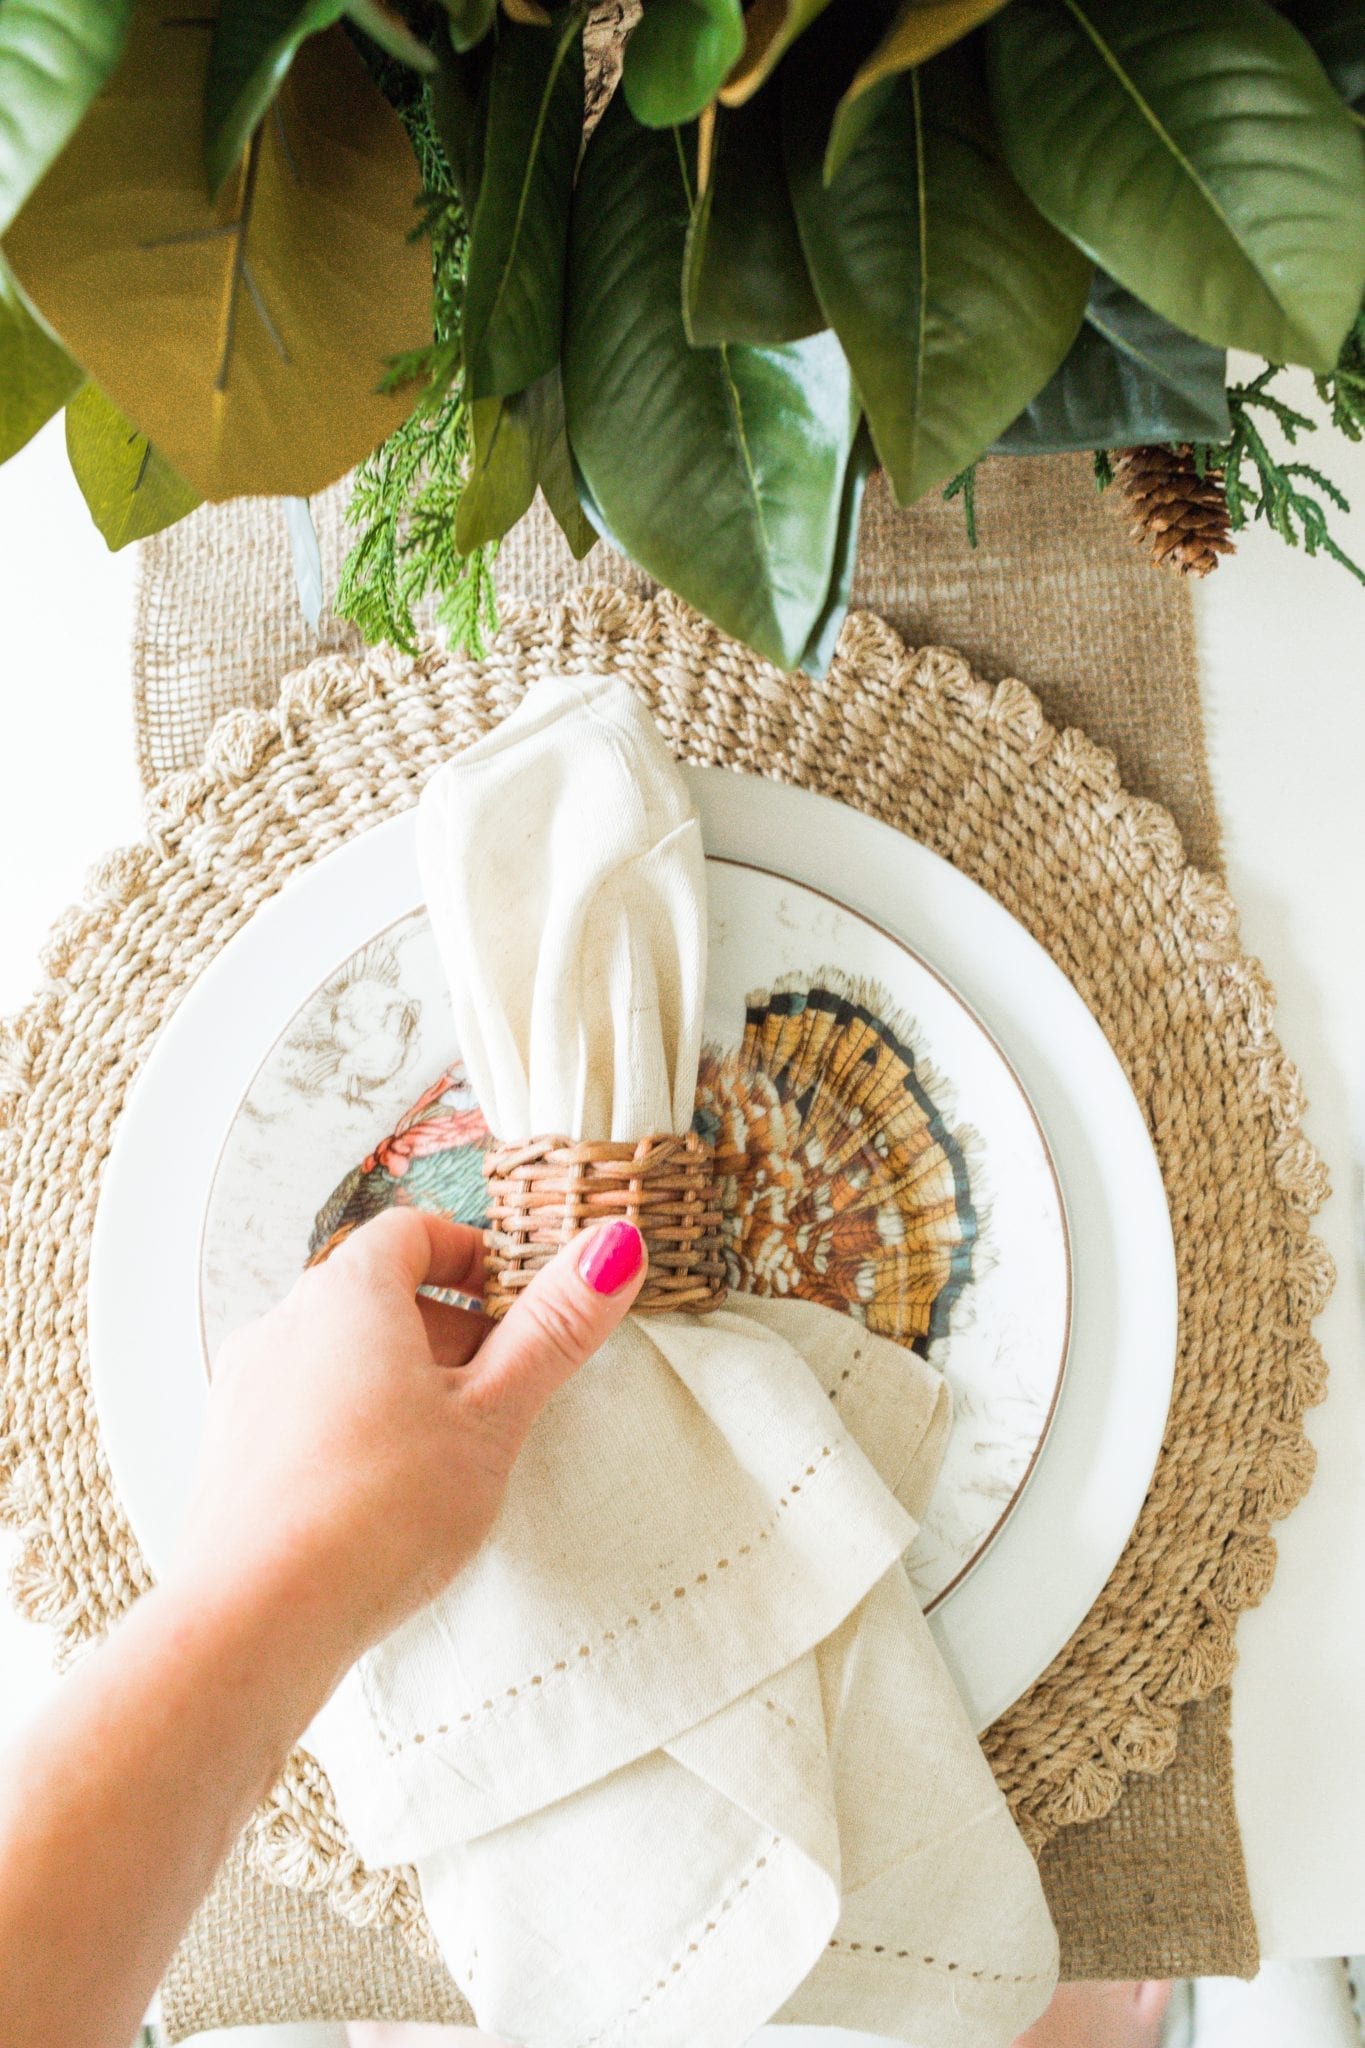 Wicker Placemat mixed with Williams Sonoma Thanksgiving plates, linen napkins and wicker placemats and napkin ring.